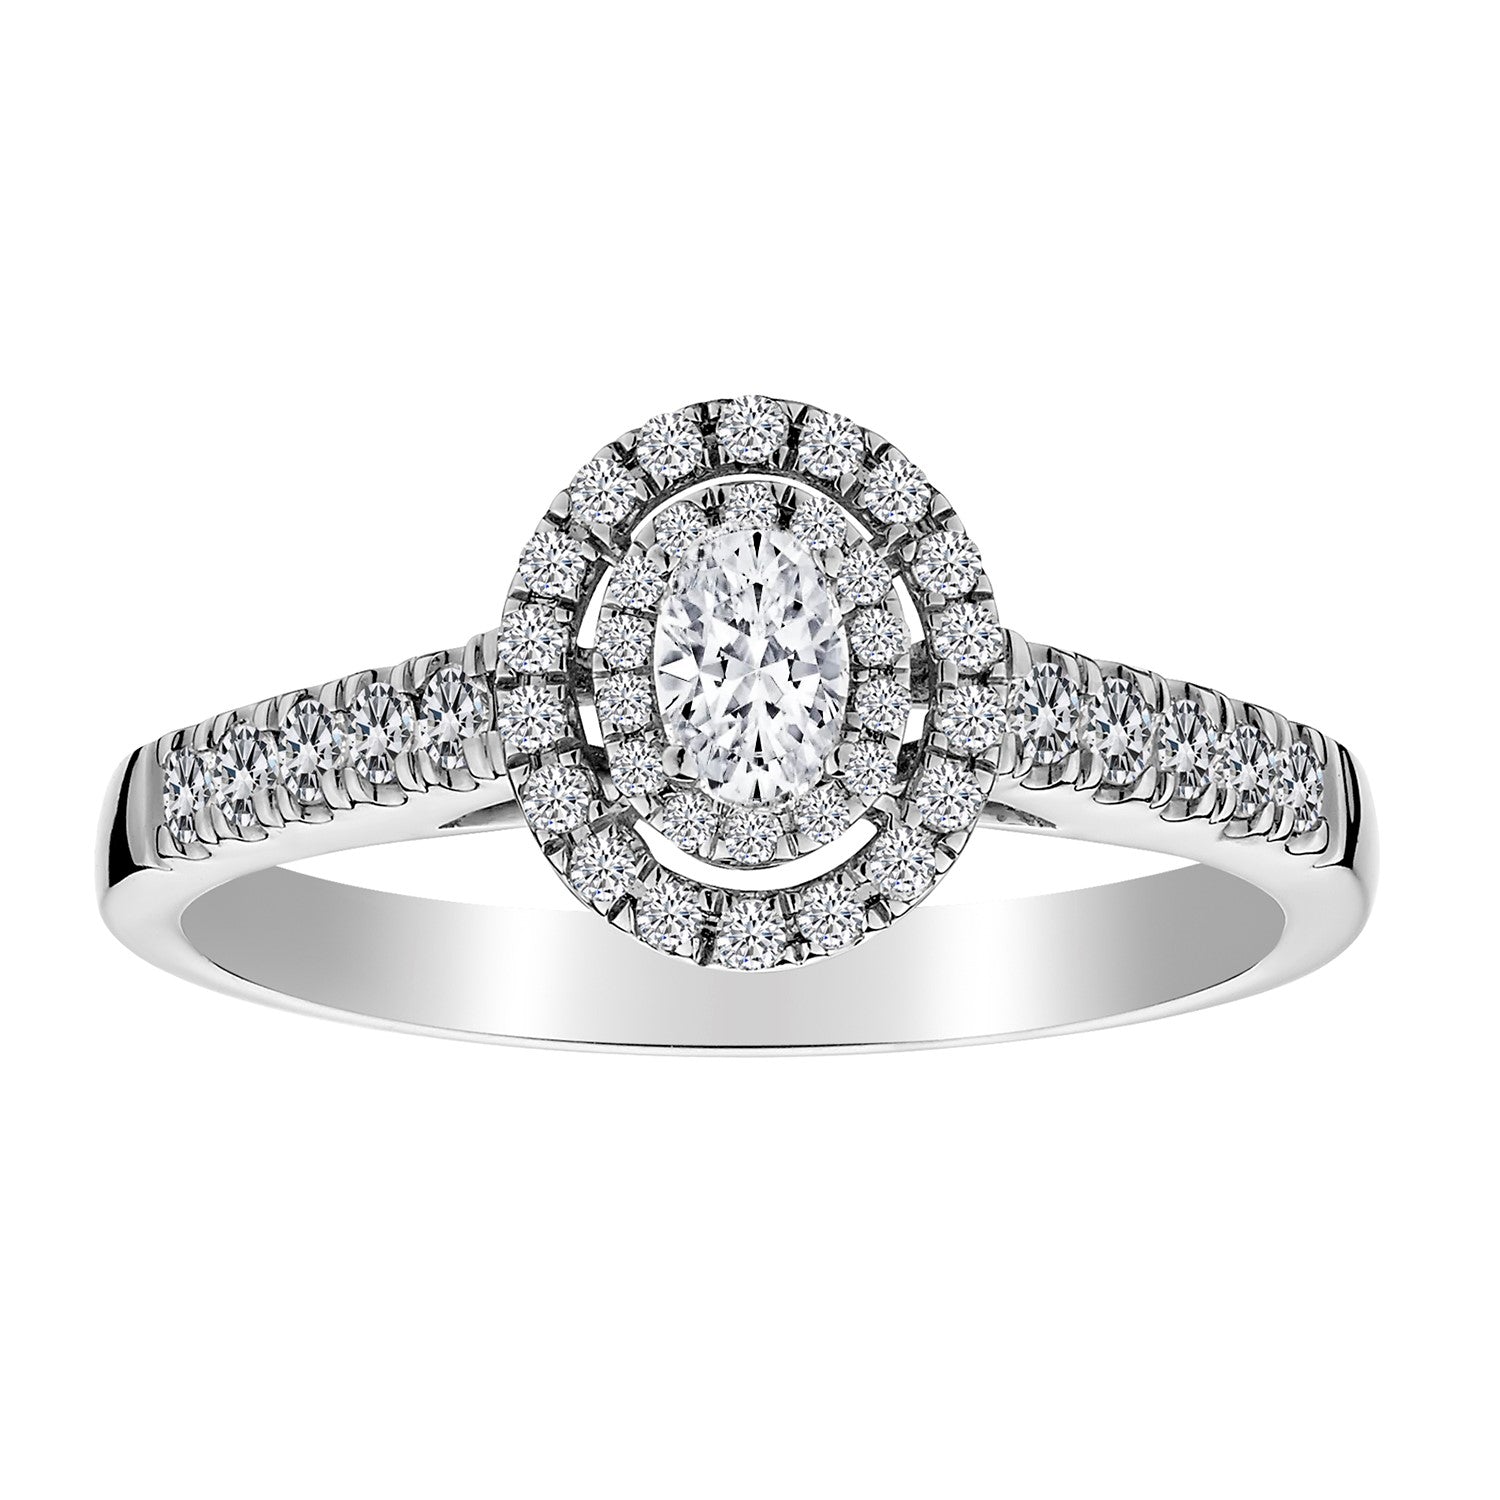 .50 Carat Diamond Oval "Elegance" Ring,  14kt White Gold. Griffin Jewellery Designs